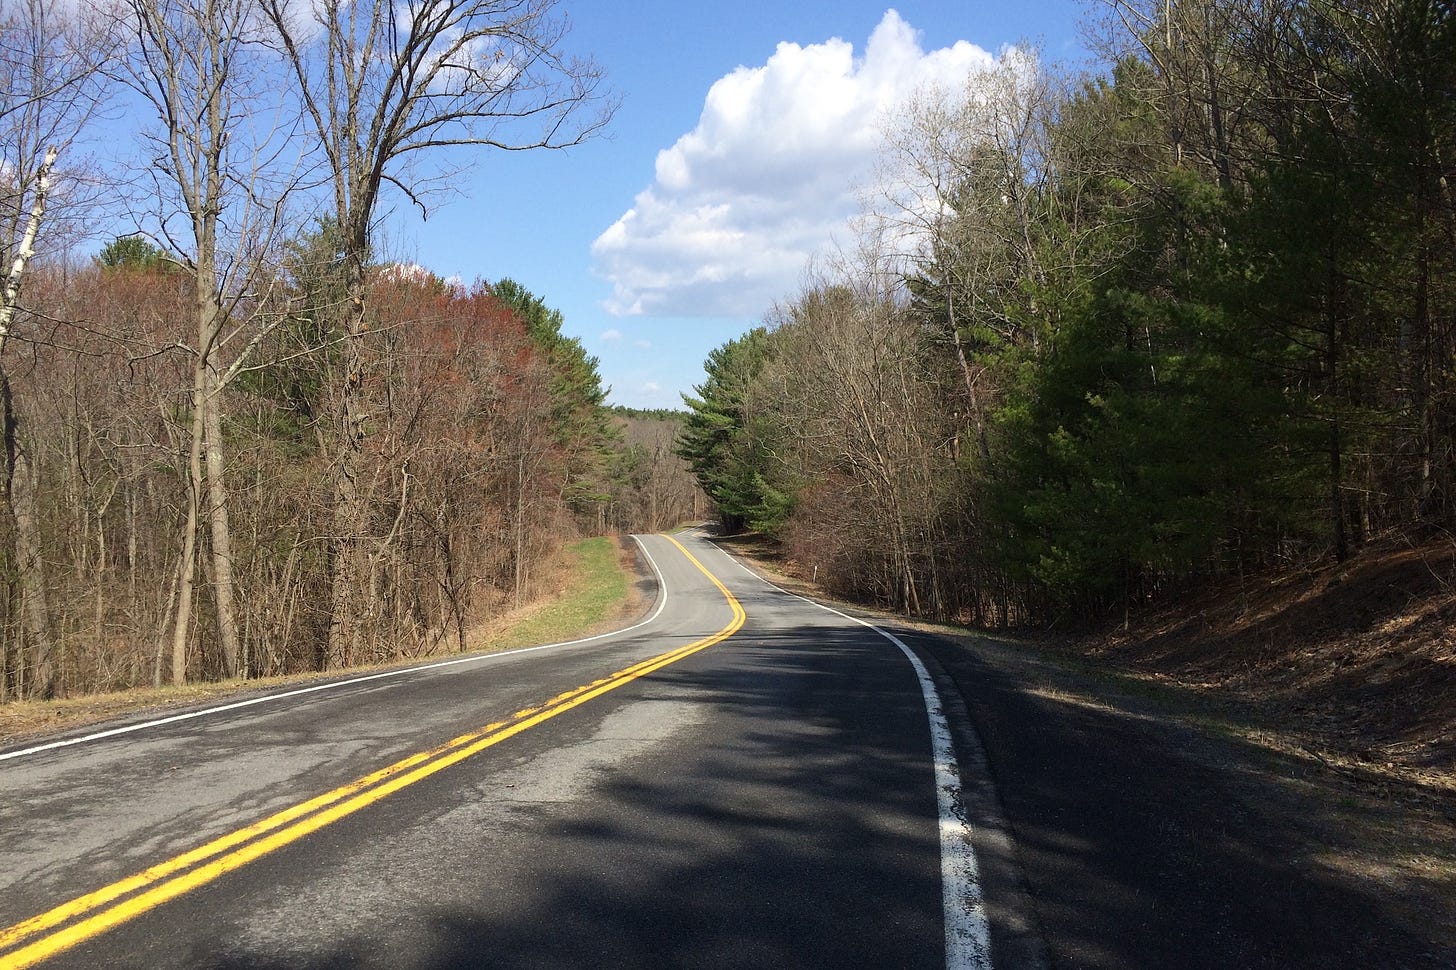 Undulating late fall mountain road, bare trees, but clear blue sky dotted by white clouds. A perfect fall bicyce ride.